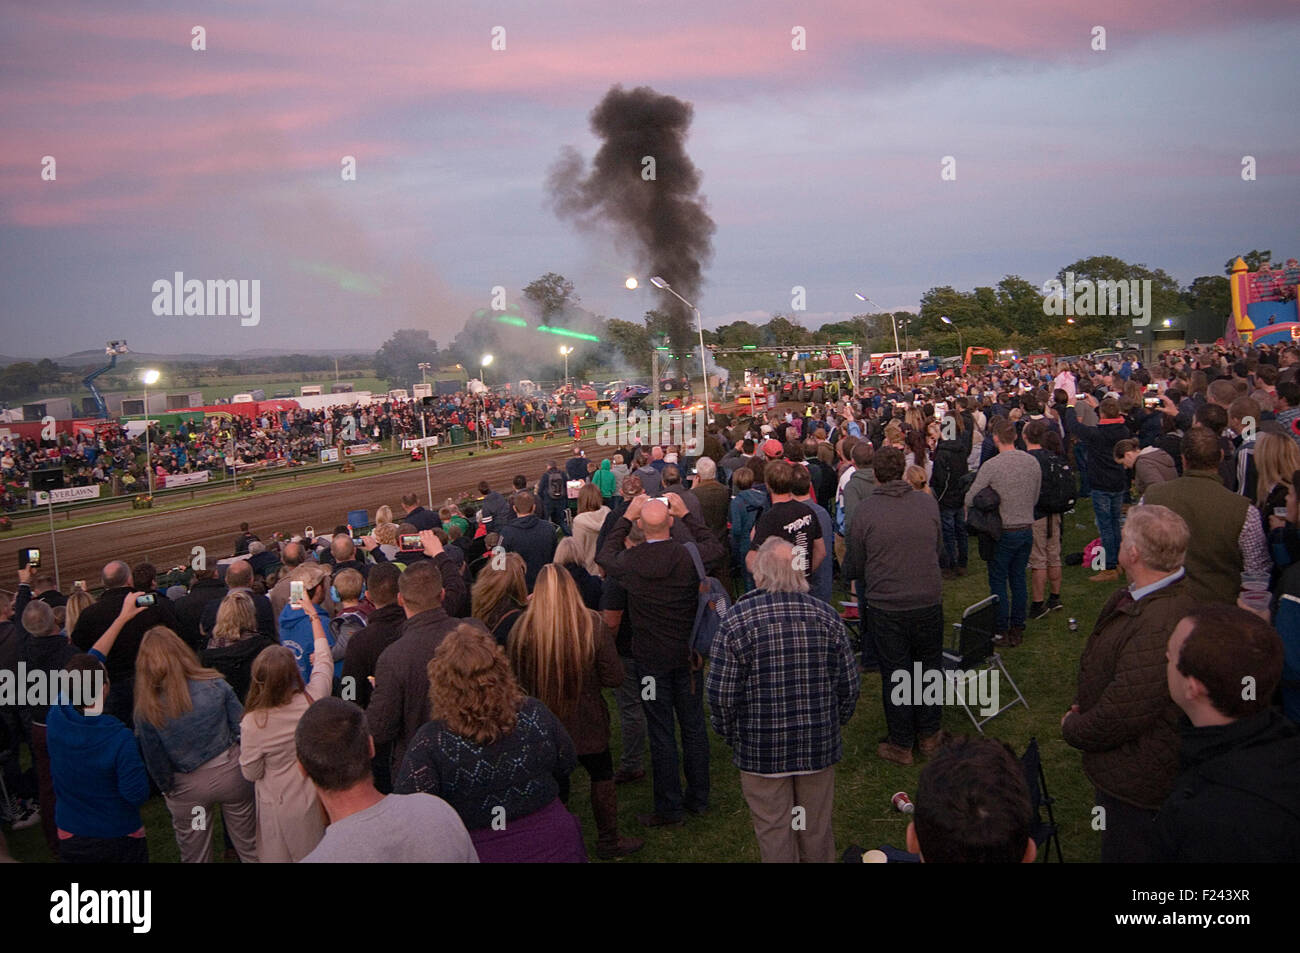 crowd at tractor pull pulling event motorsport public liability motor race racing spectators people crowds Stock Photo